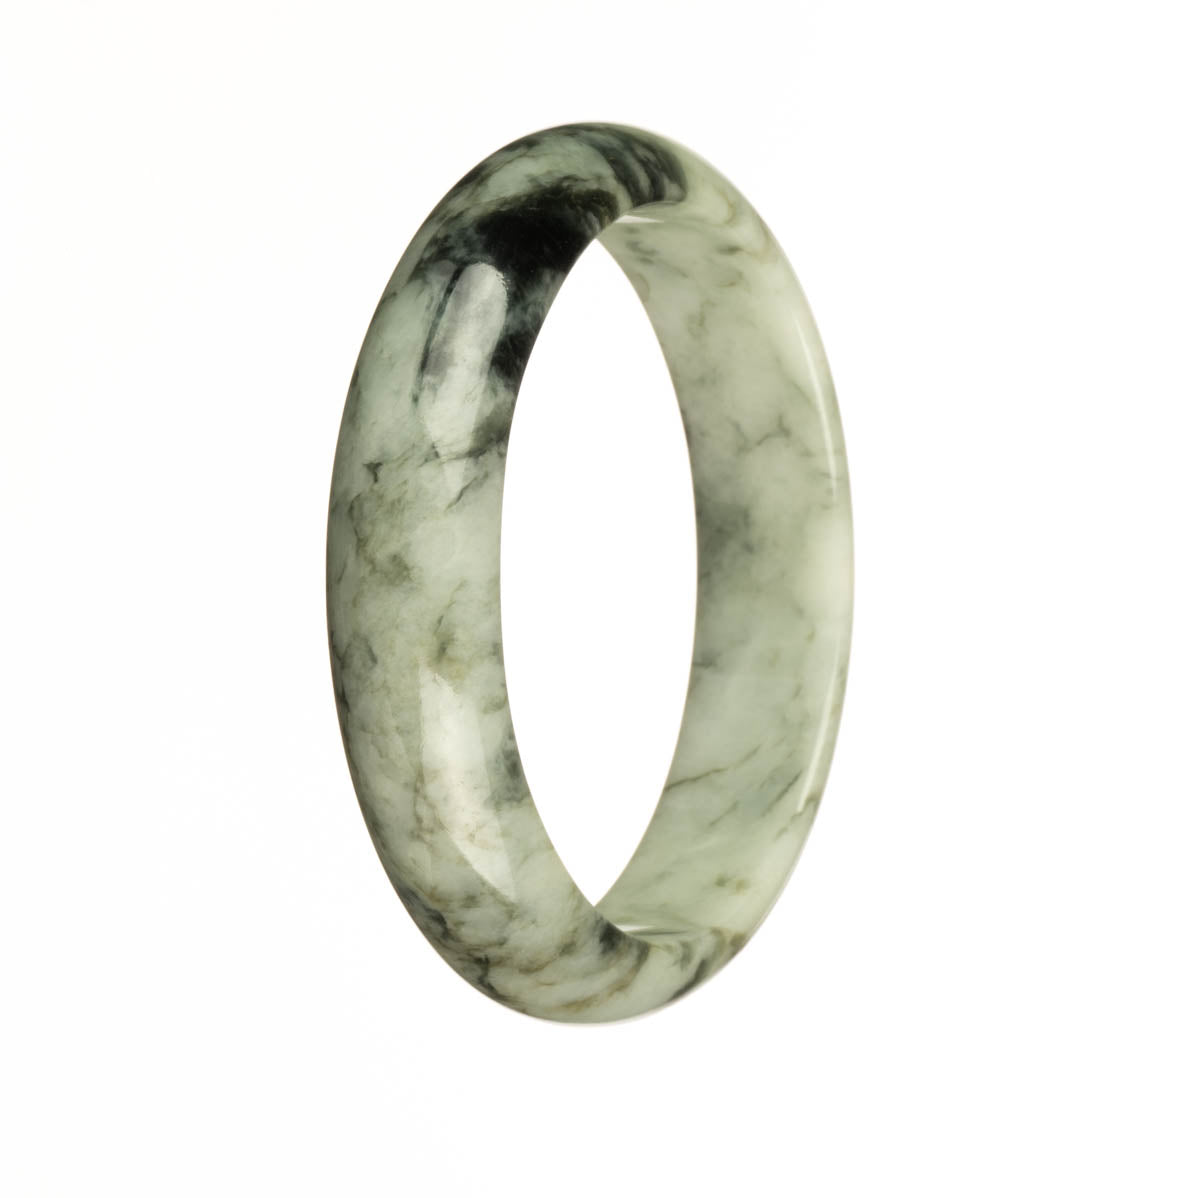 Close-up image of a traditional jade bracelet with a half moon shape, featuring a certified Type A white jade with dark green patterns.